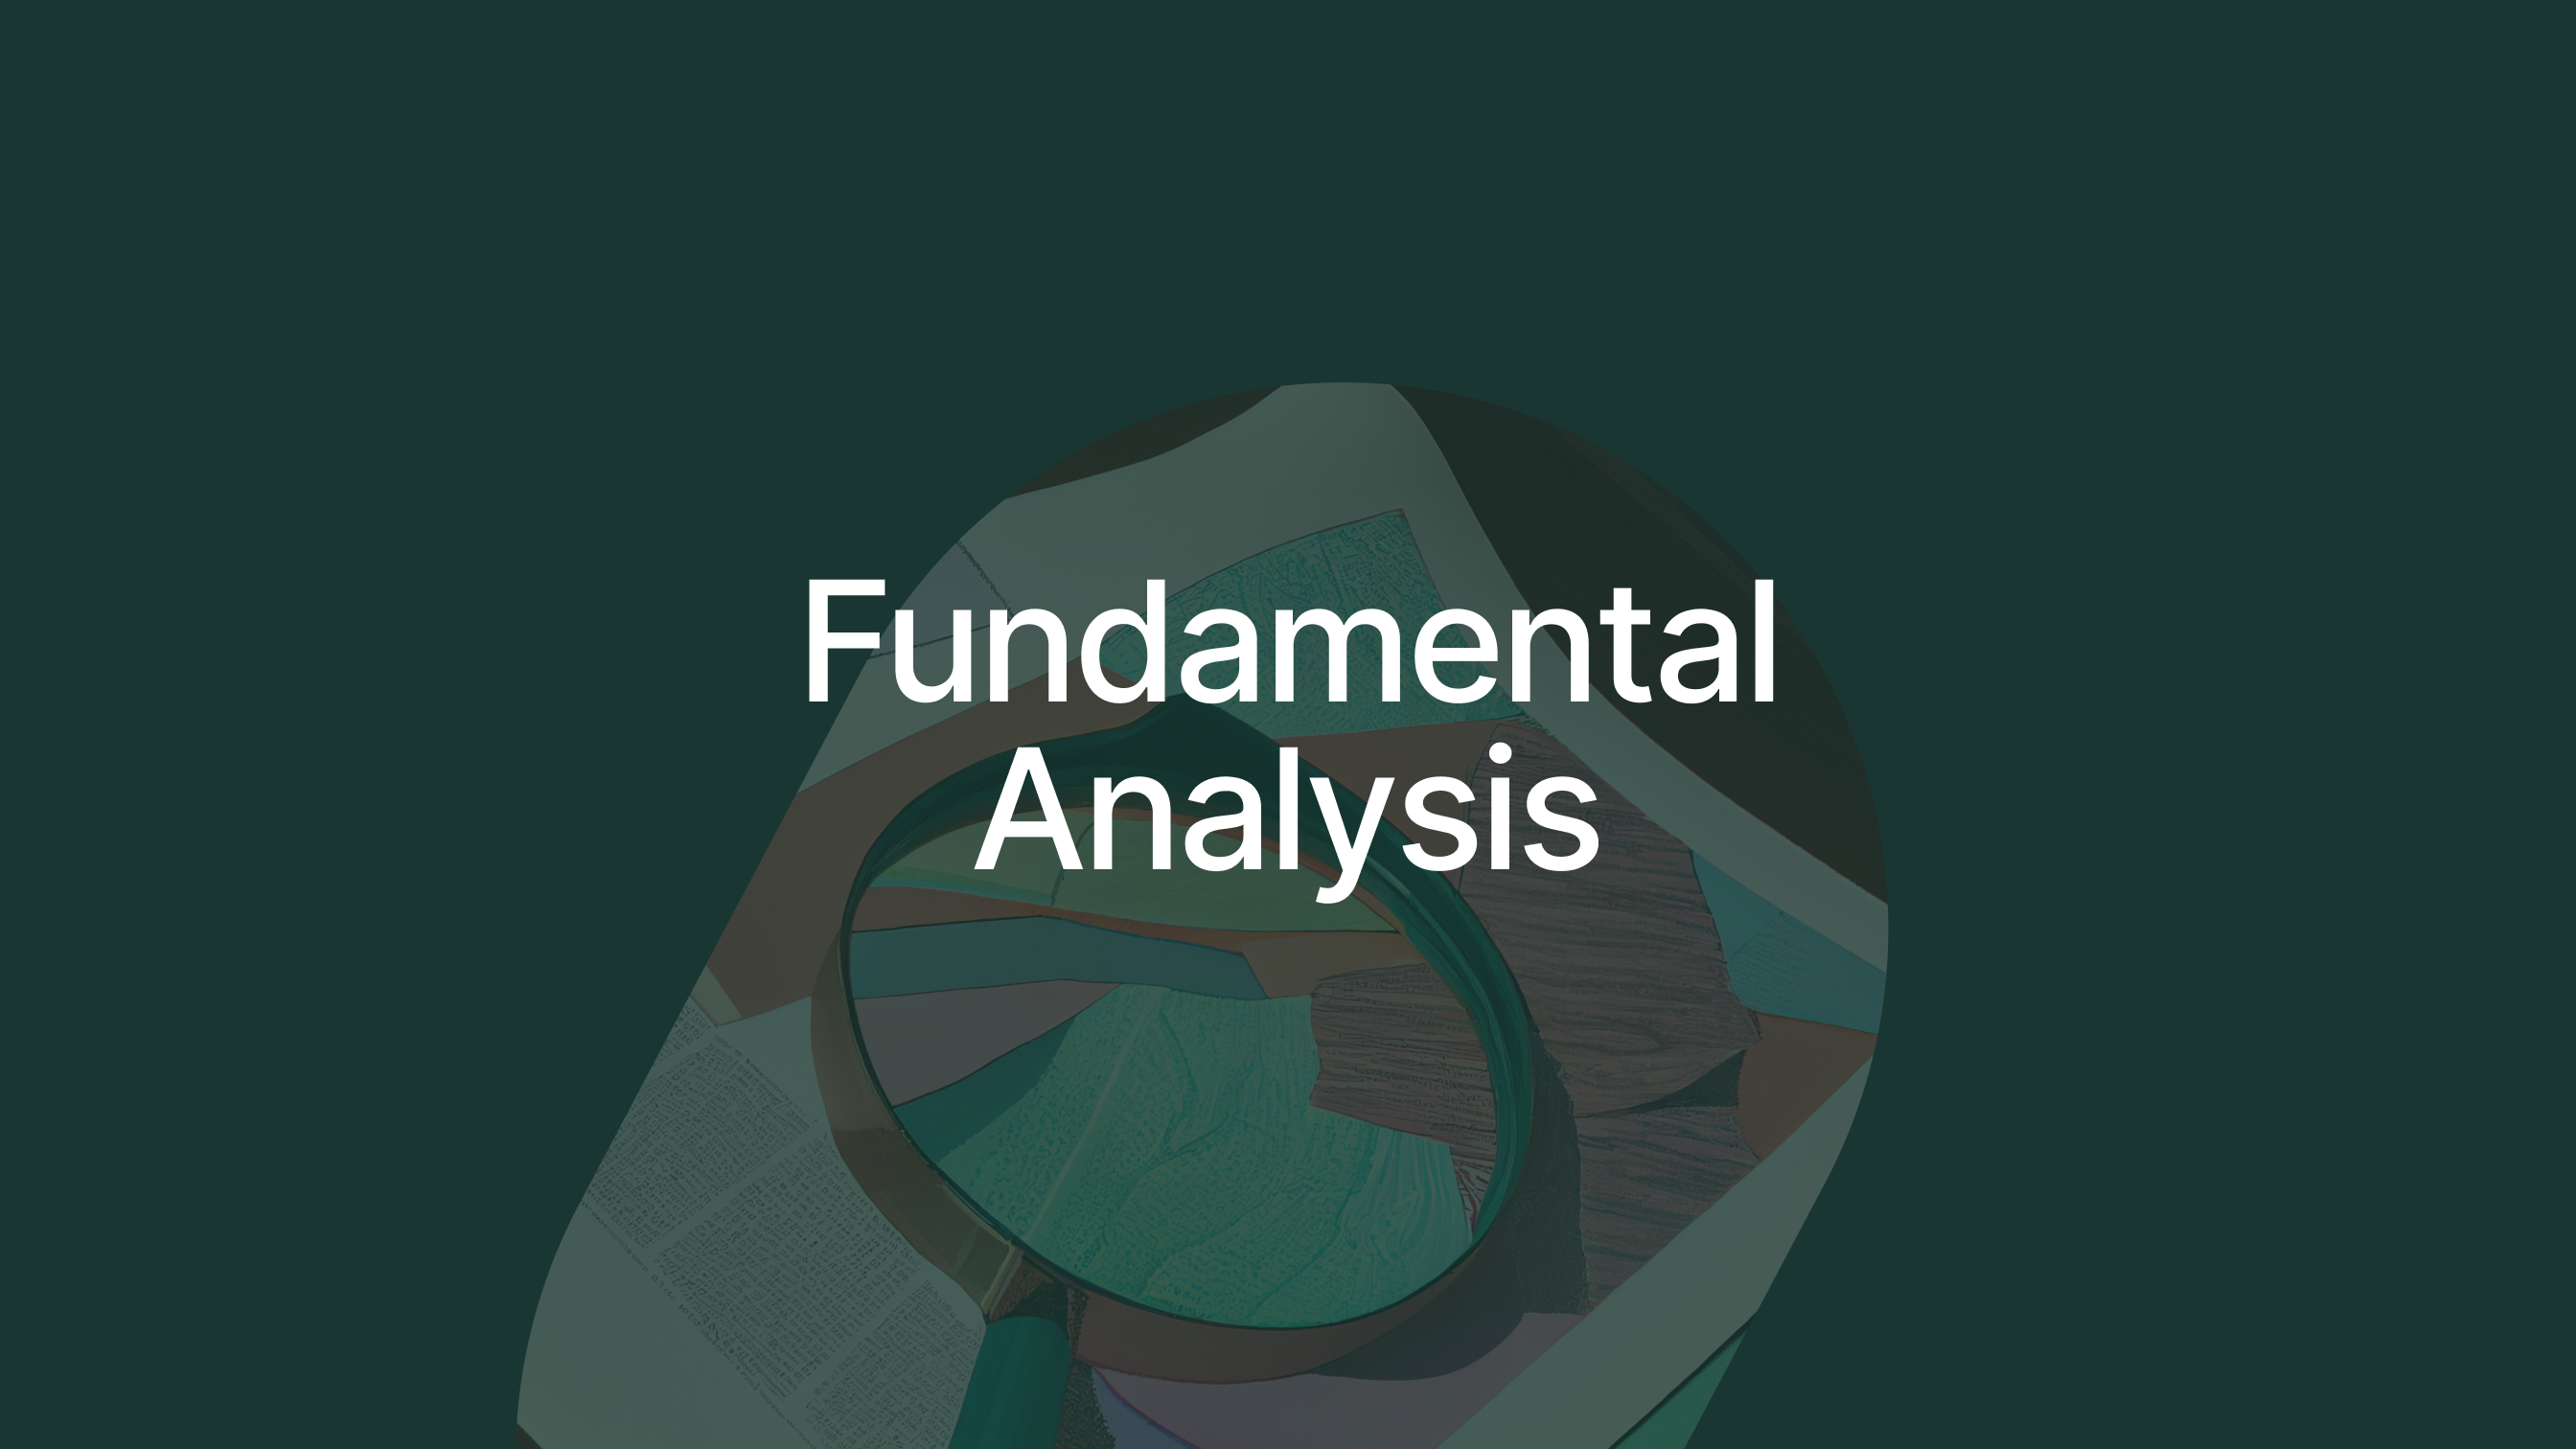 Fundamental analysis - a commonly used method when picking stocks